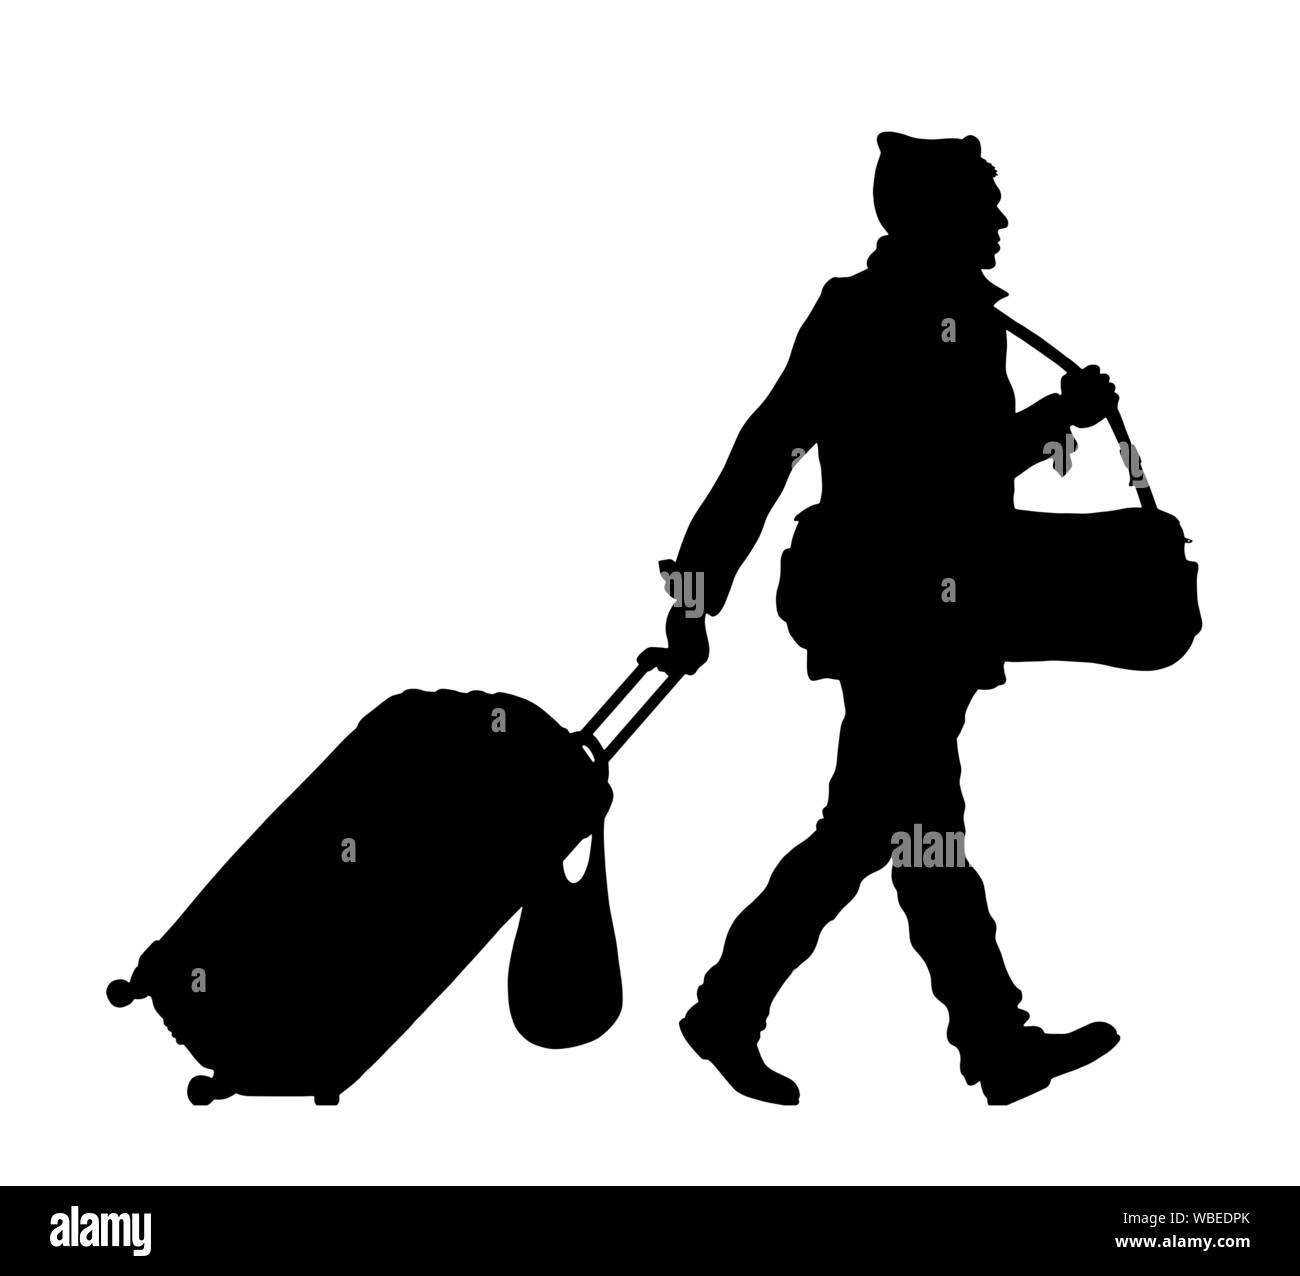 Refugee man silhouette with wheeled bag and valise. The silhouette objects and background are in different layers. Stock Vector